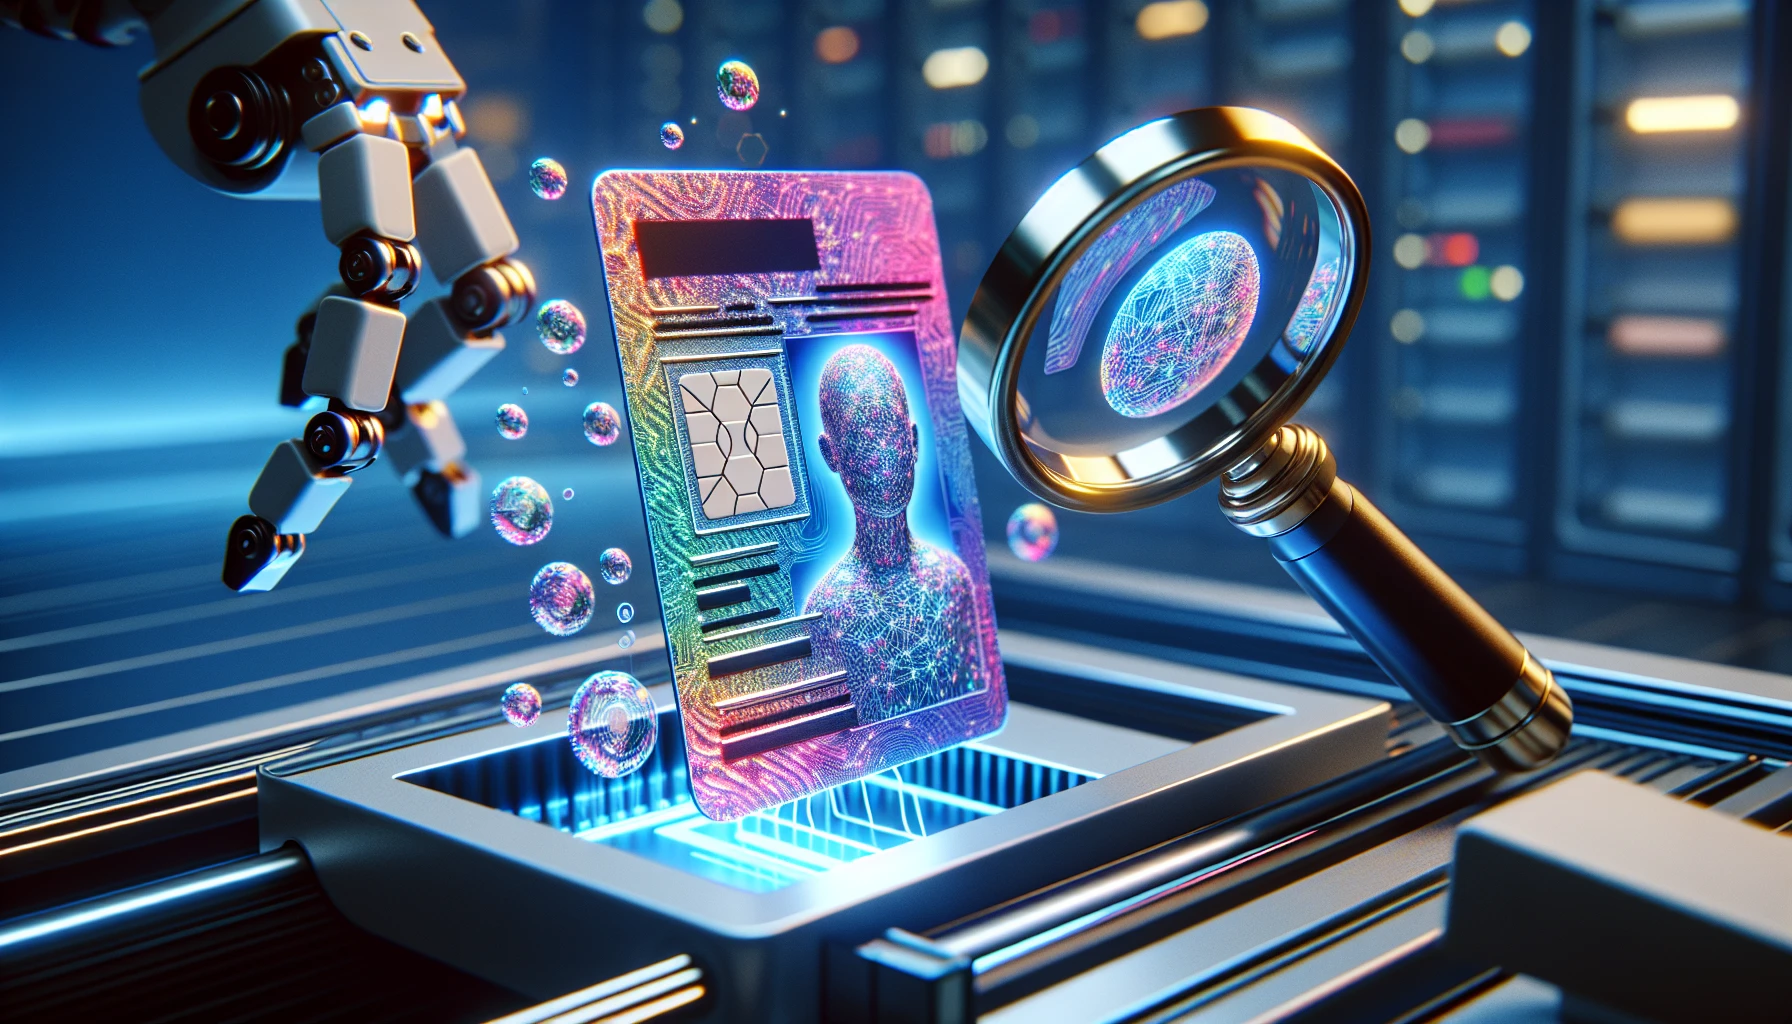 Holographic security features on a fake ID